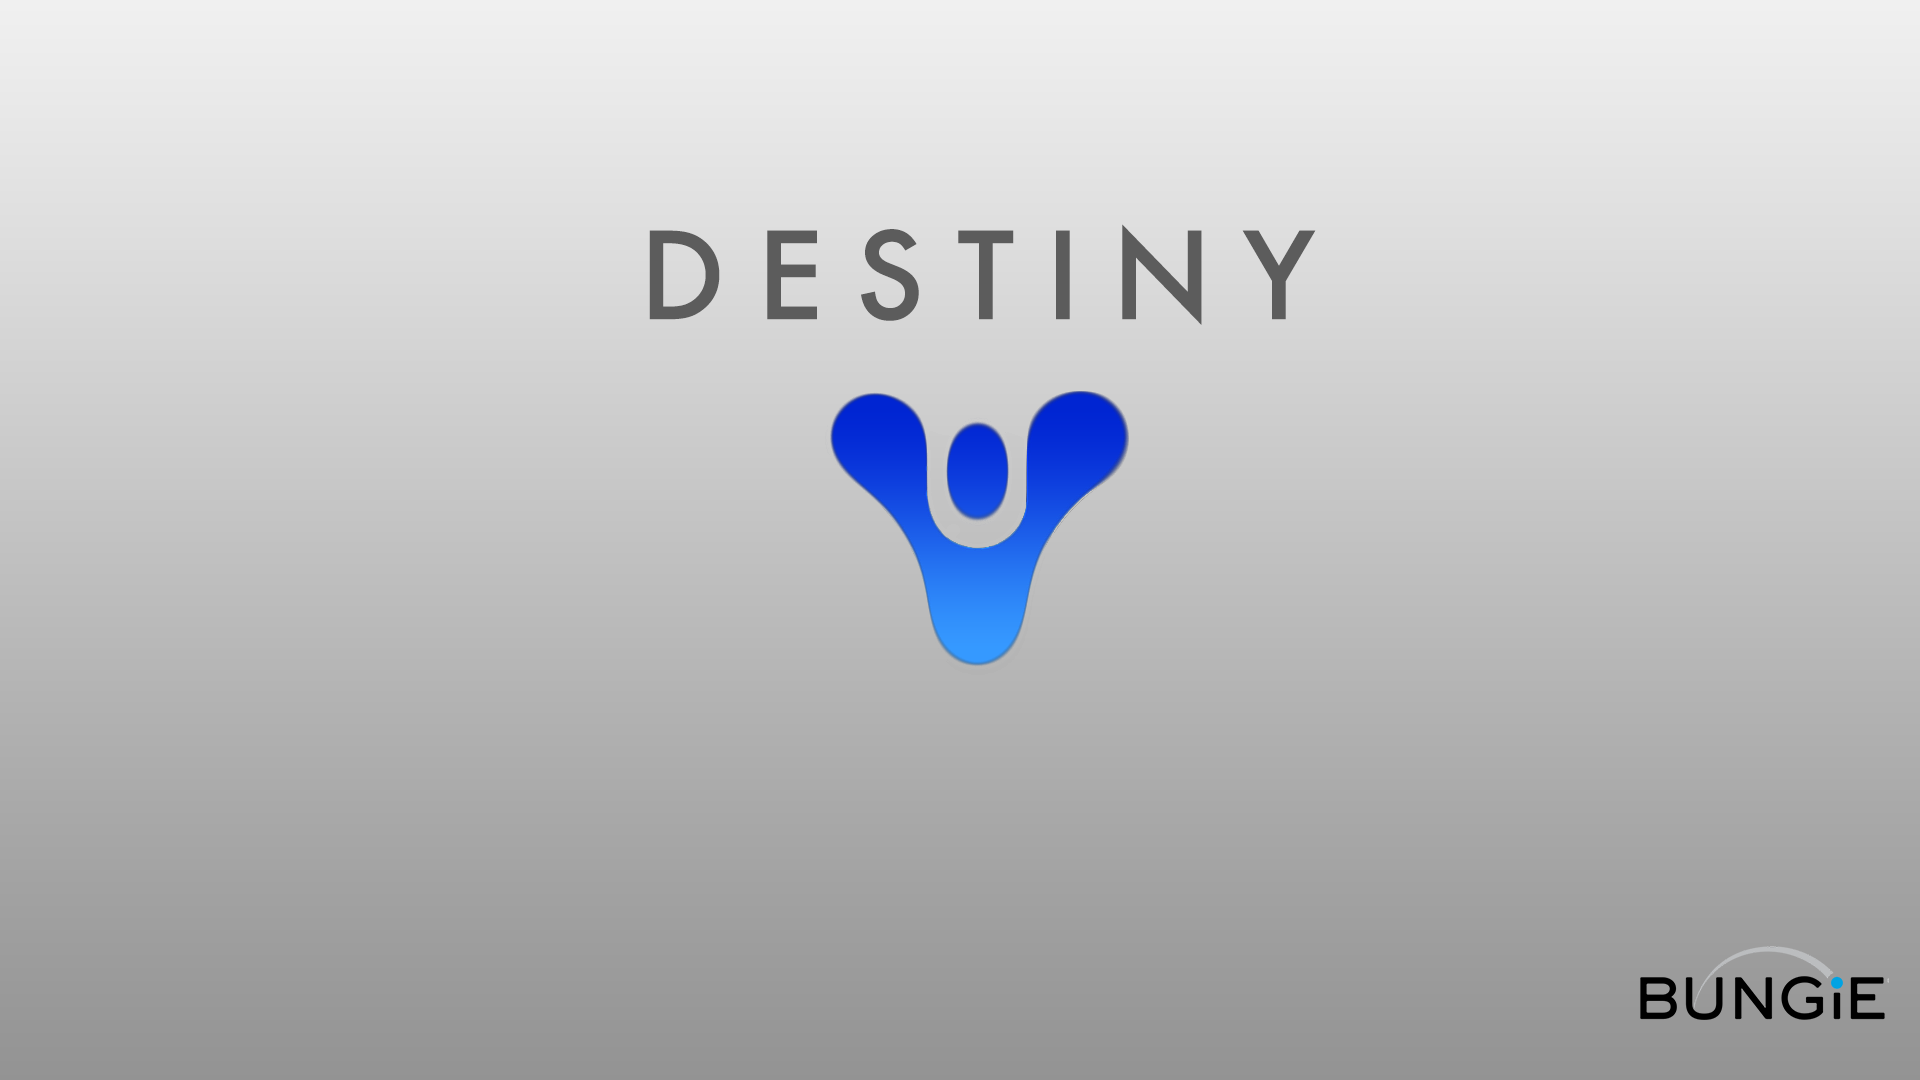 during Art 2500 I was able to finish the Destiny minimalist wallpapers